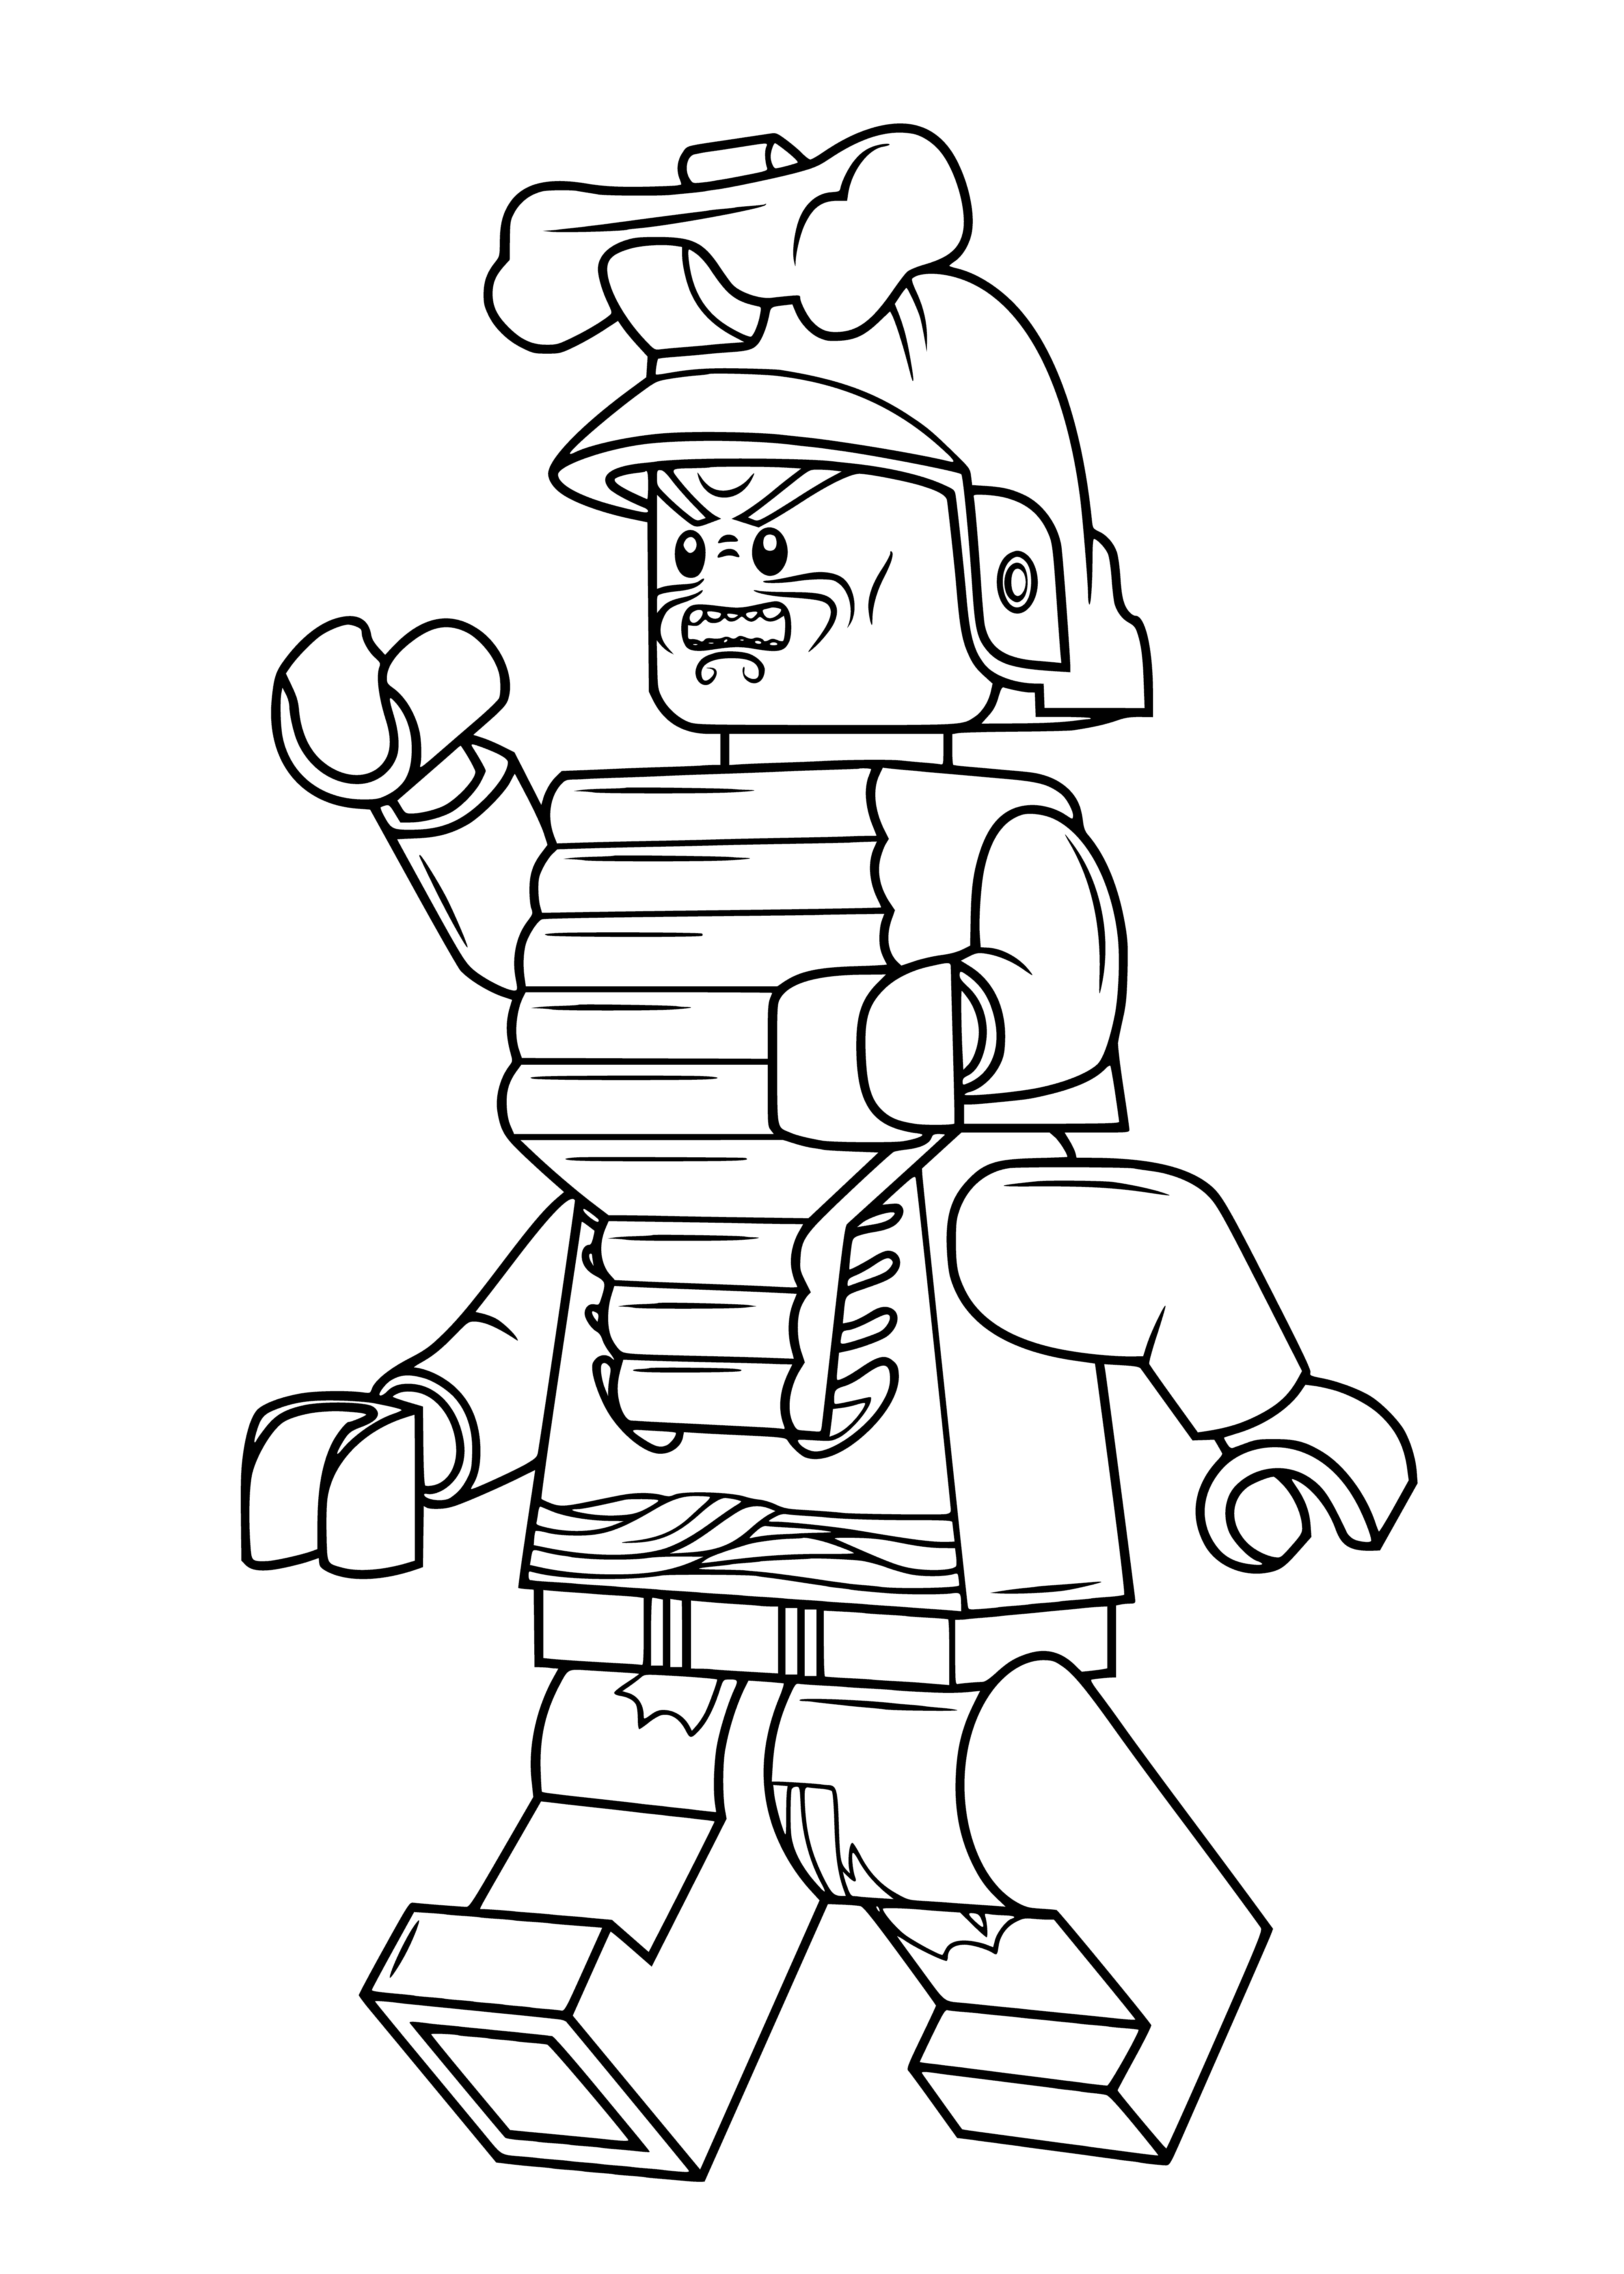 coloring page: LEGO Ninjago figure Garmadon stands on green base, has yellow features, black eyes/mouth, white beard/eyebrows, holding gray sword in right hand.